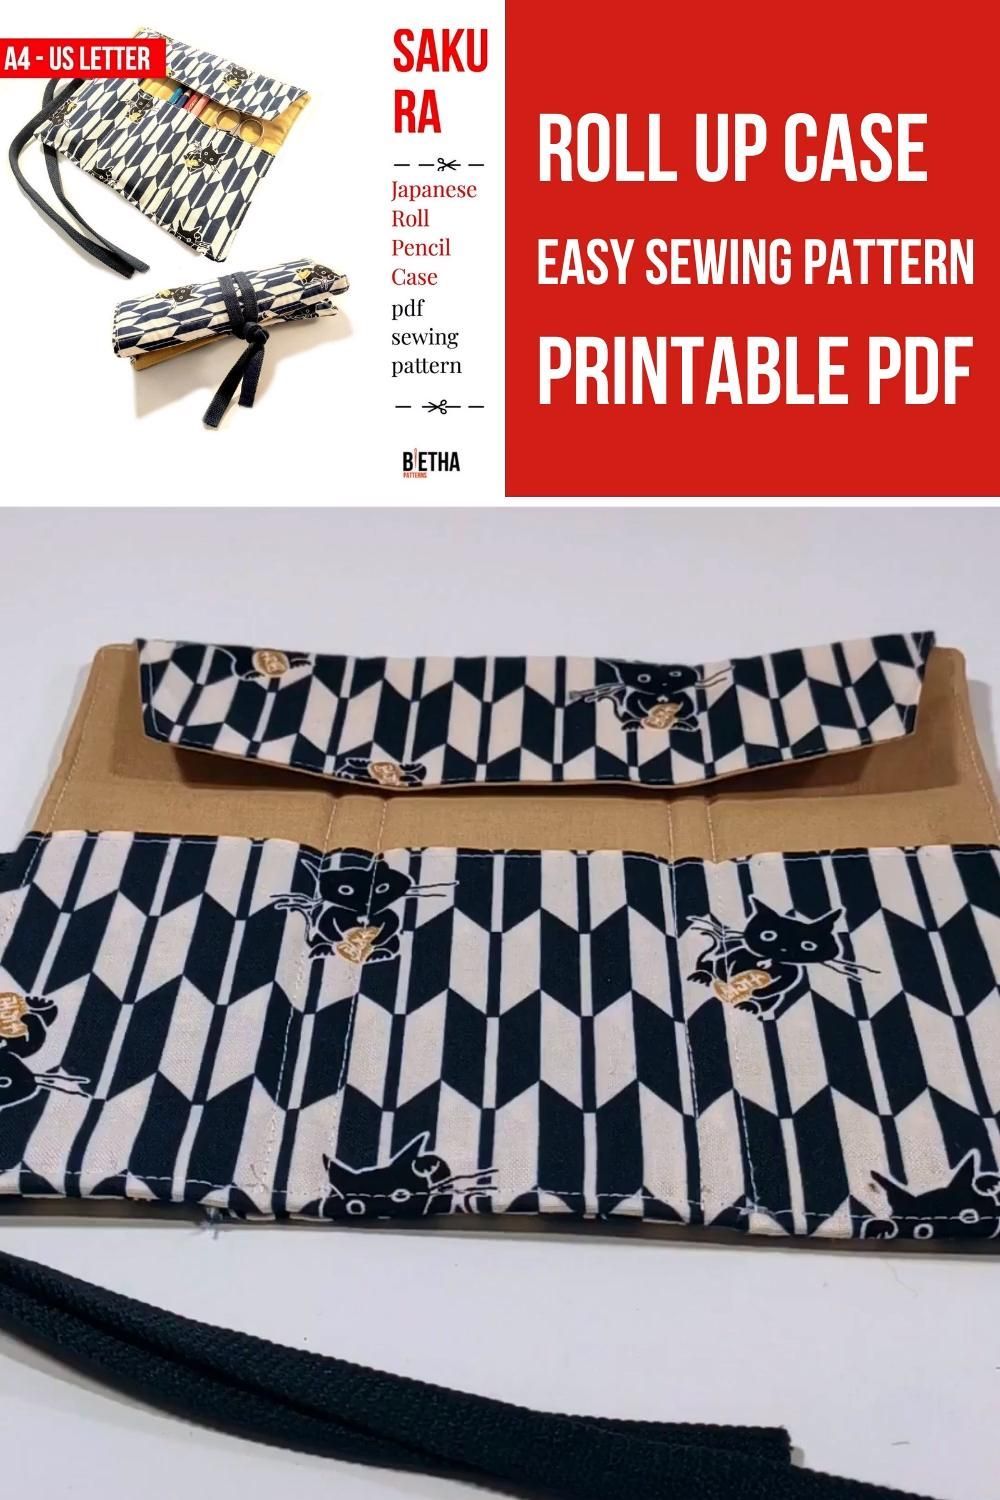 Roll Up Case Easy Sewing Pattern - Printable PDF - Roll Up Case Easy Sewing Pattern - Printable PDF -   fabric crafts diy easy